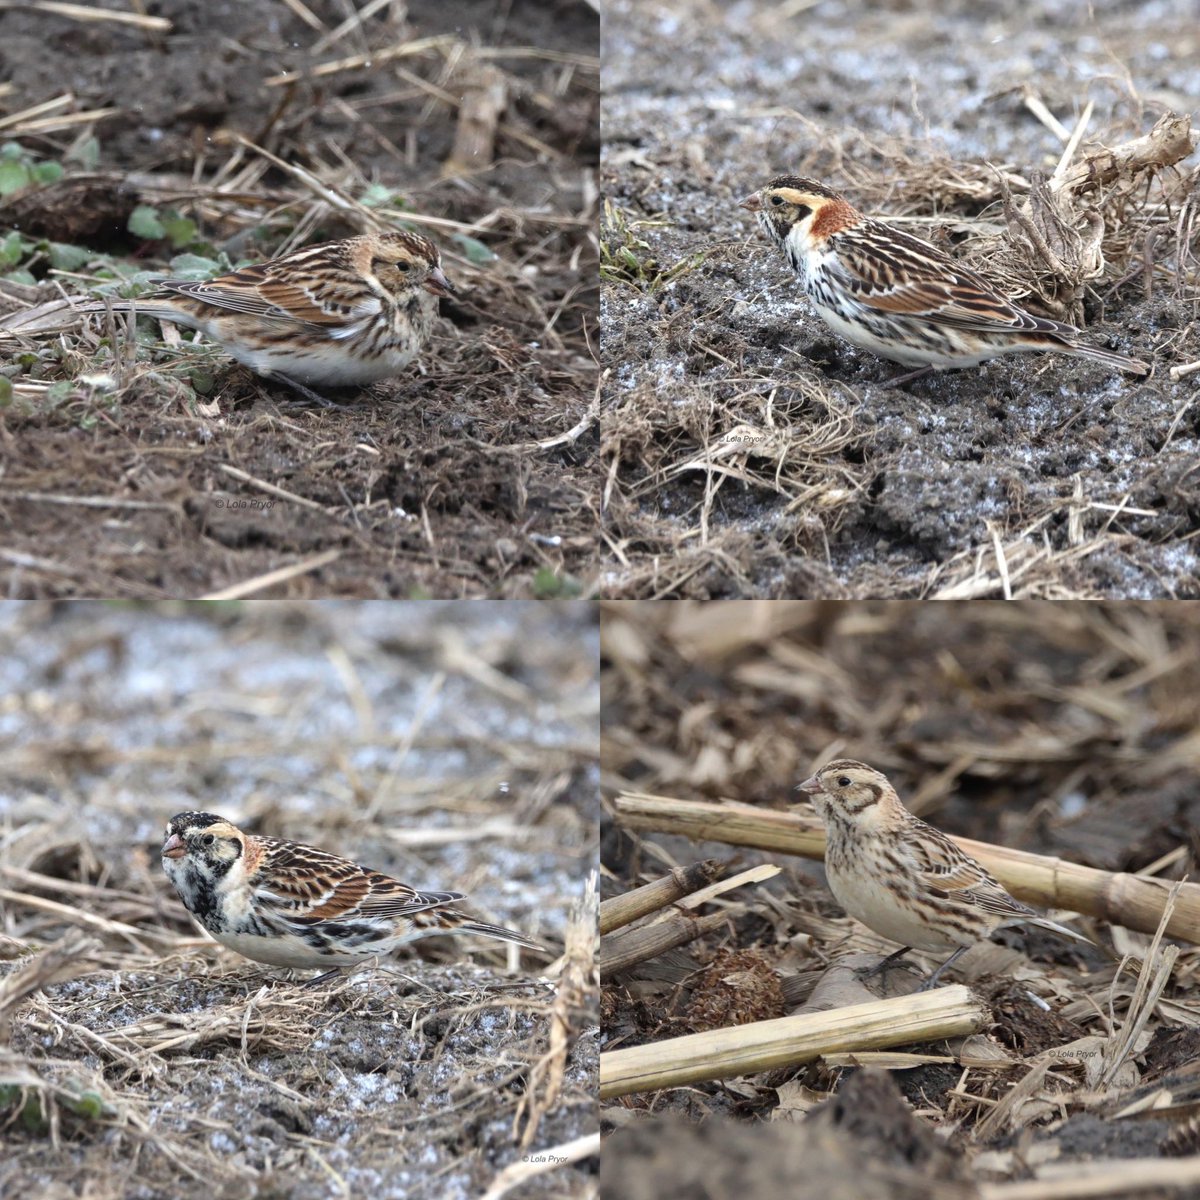 Look at these little Lapland Longspur, that Lola Pryor captured here from Marion County. #ohiobirds #ohiobird #ohiobirding #ohiobirdnerds #ohiobirdwatching #ohiowildlife #MarionOhio #MarionMade #ohio #birds #BirdsSeenIn2023